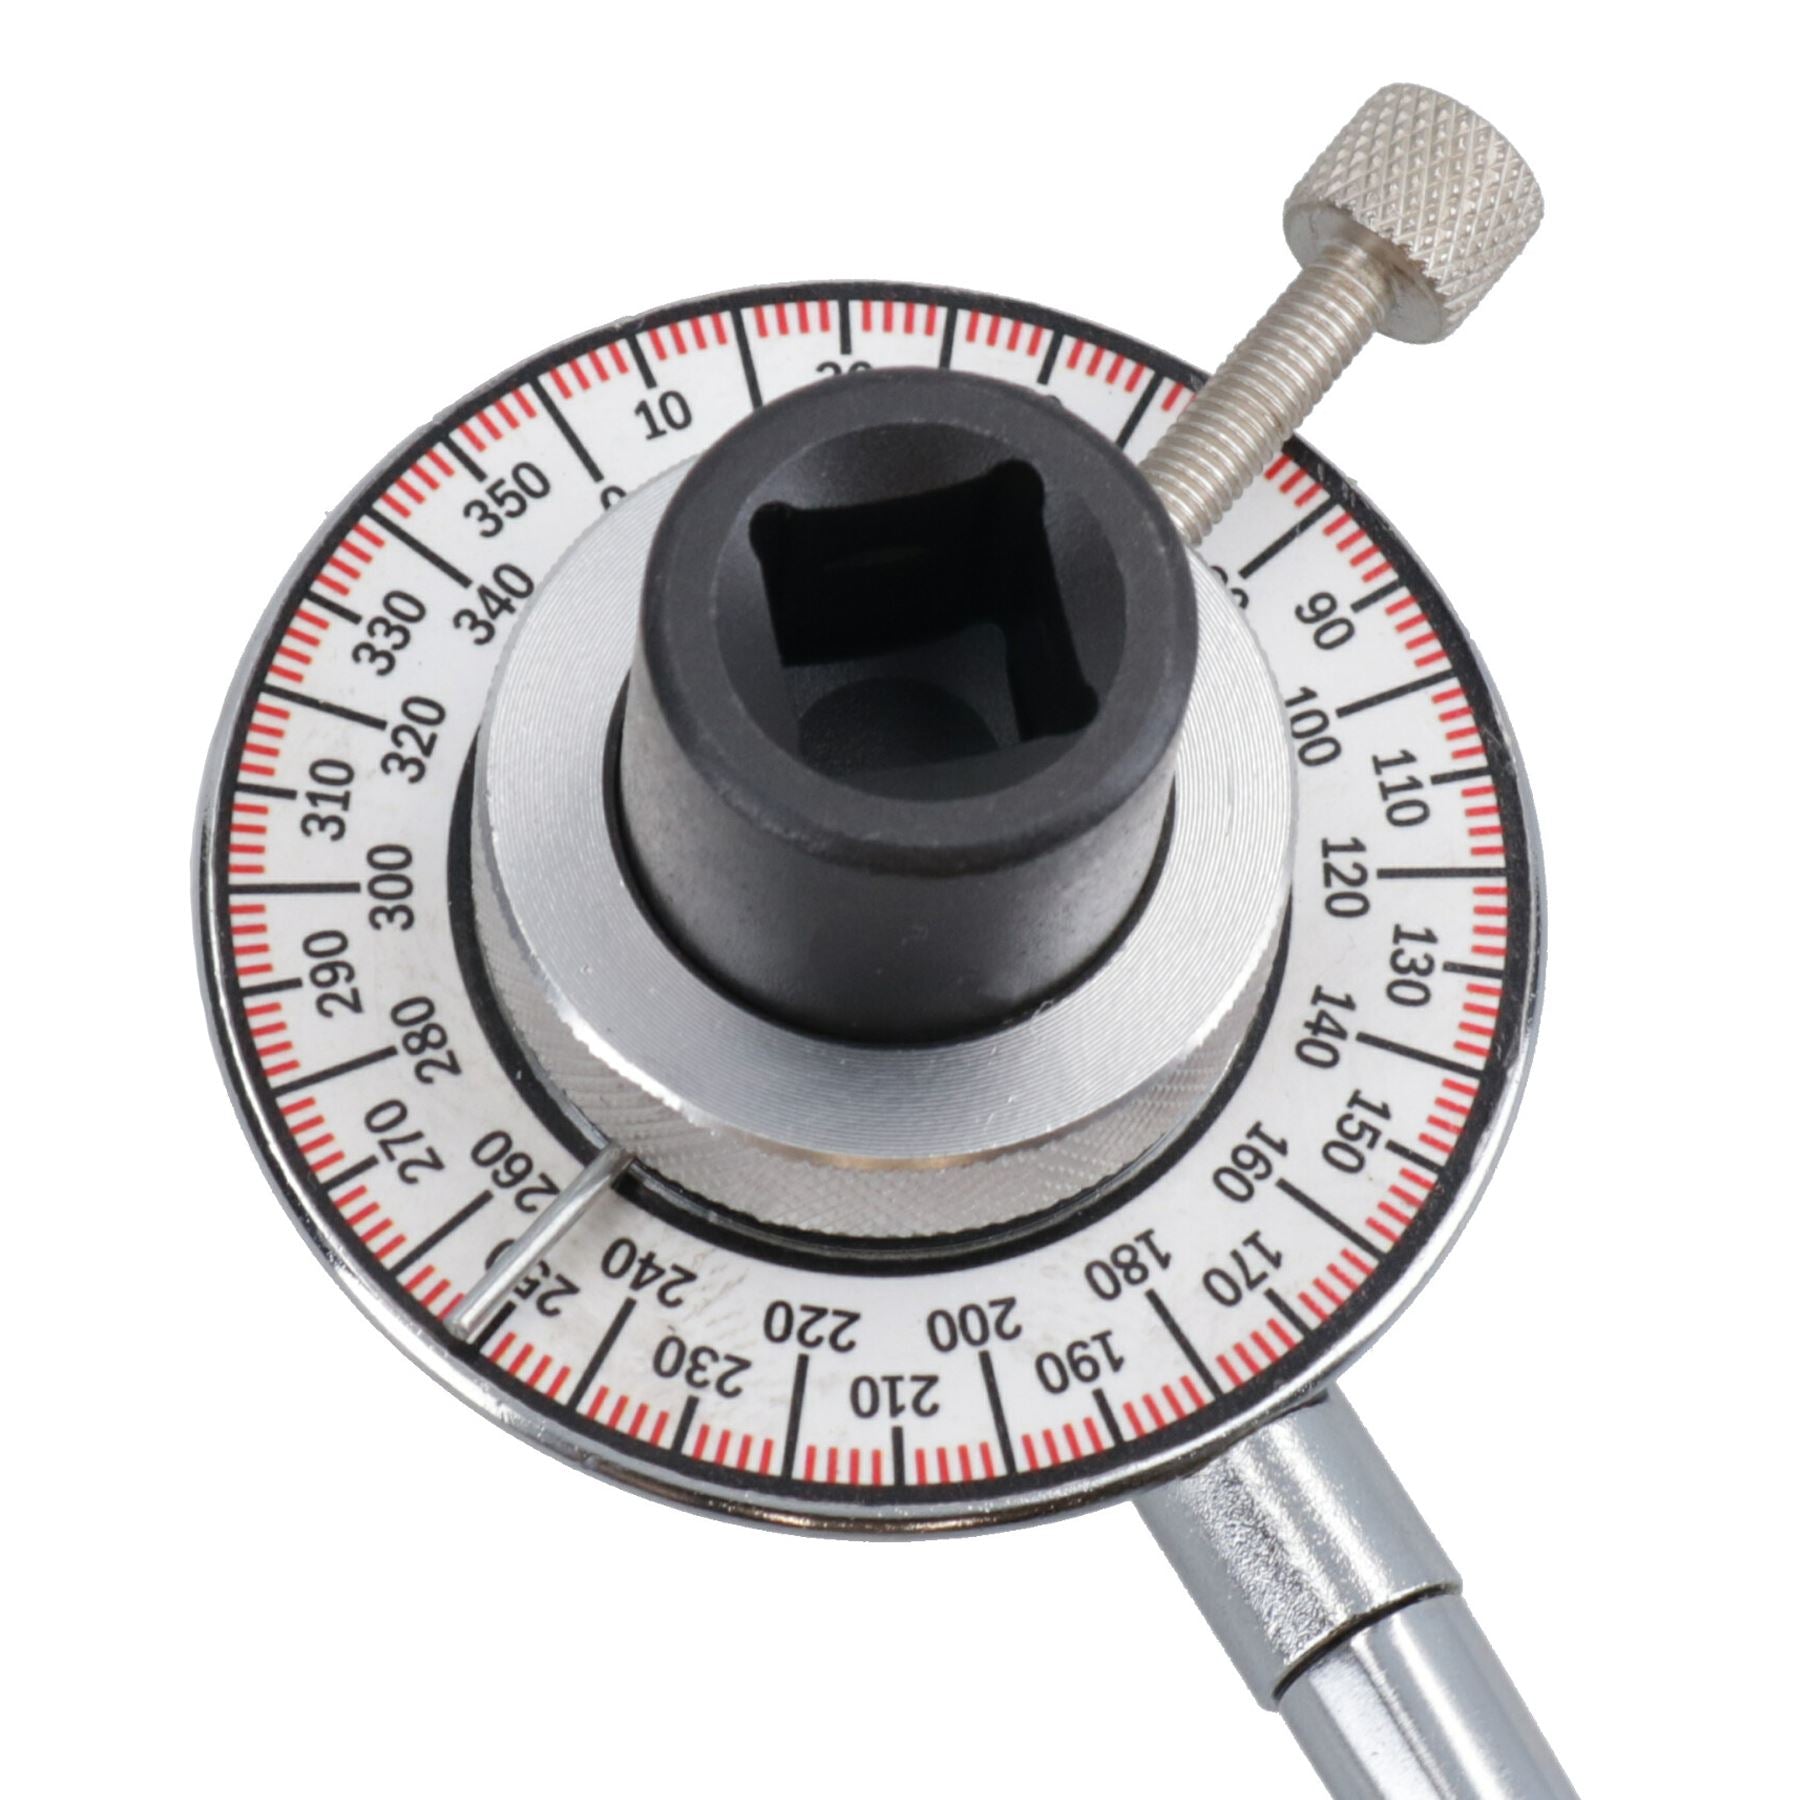 1/2in Drive Torque Setting Angular Gauge with Magnetic Flexible Arm for Fasteners